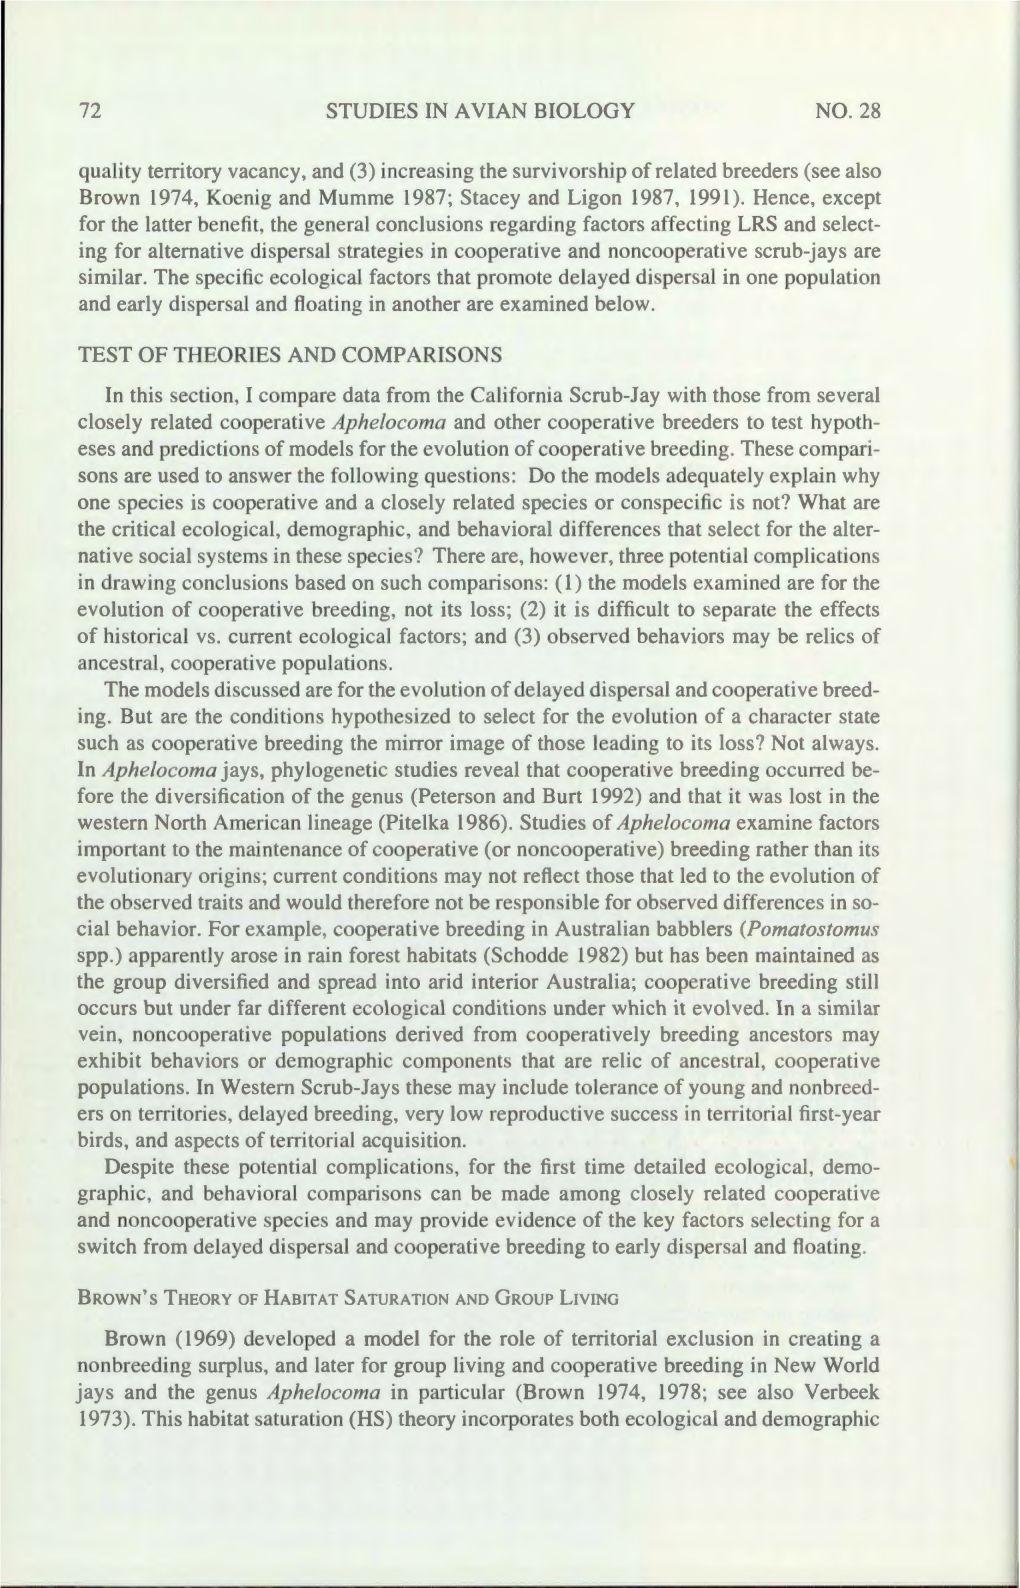 SAB 028 2004 P72-89 Test of Theories and Comparisons.Pdf